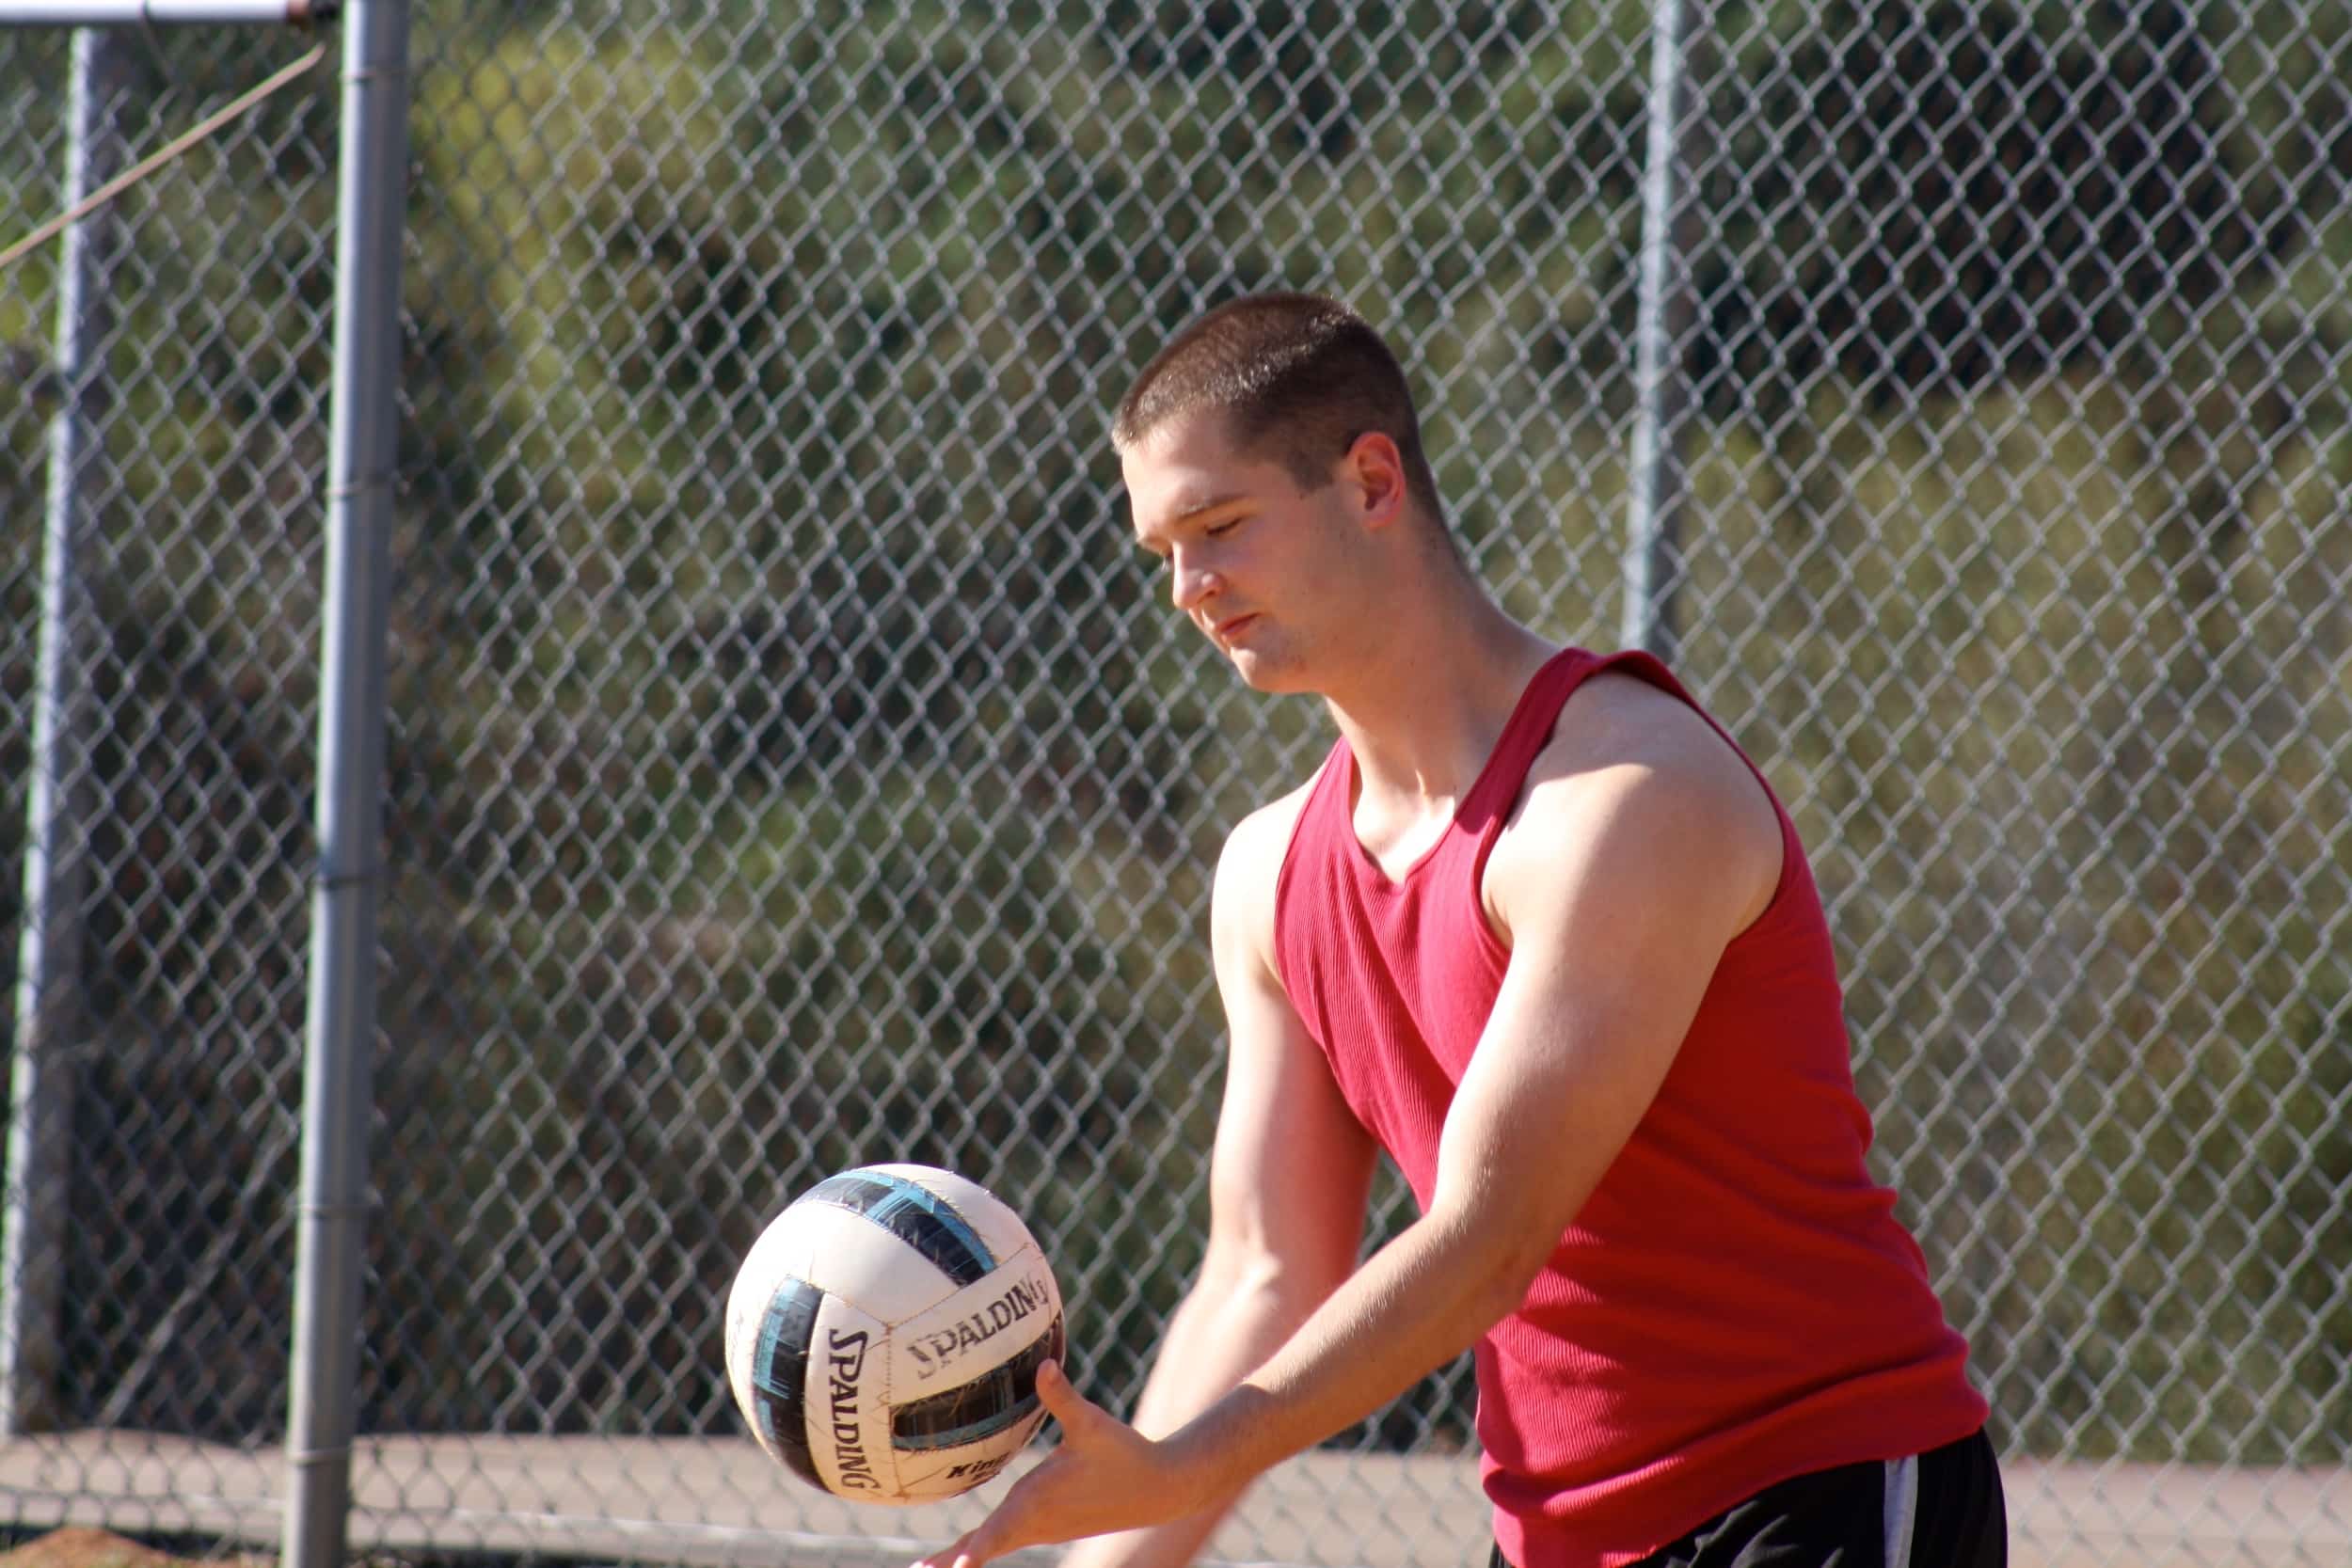  A student serves the ball for his team. 